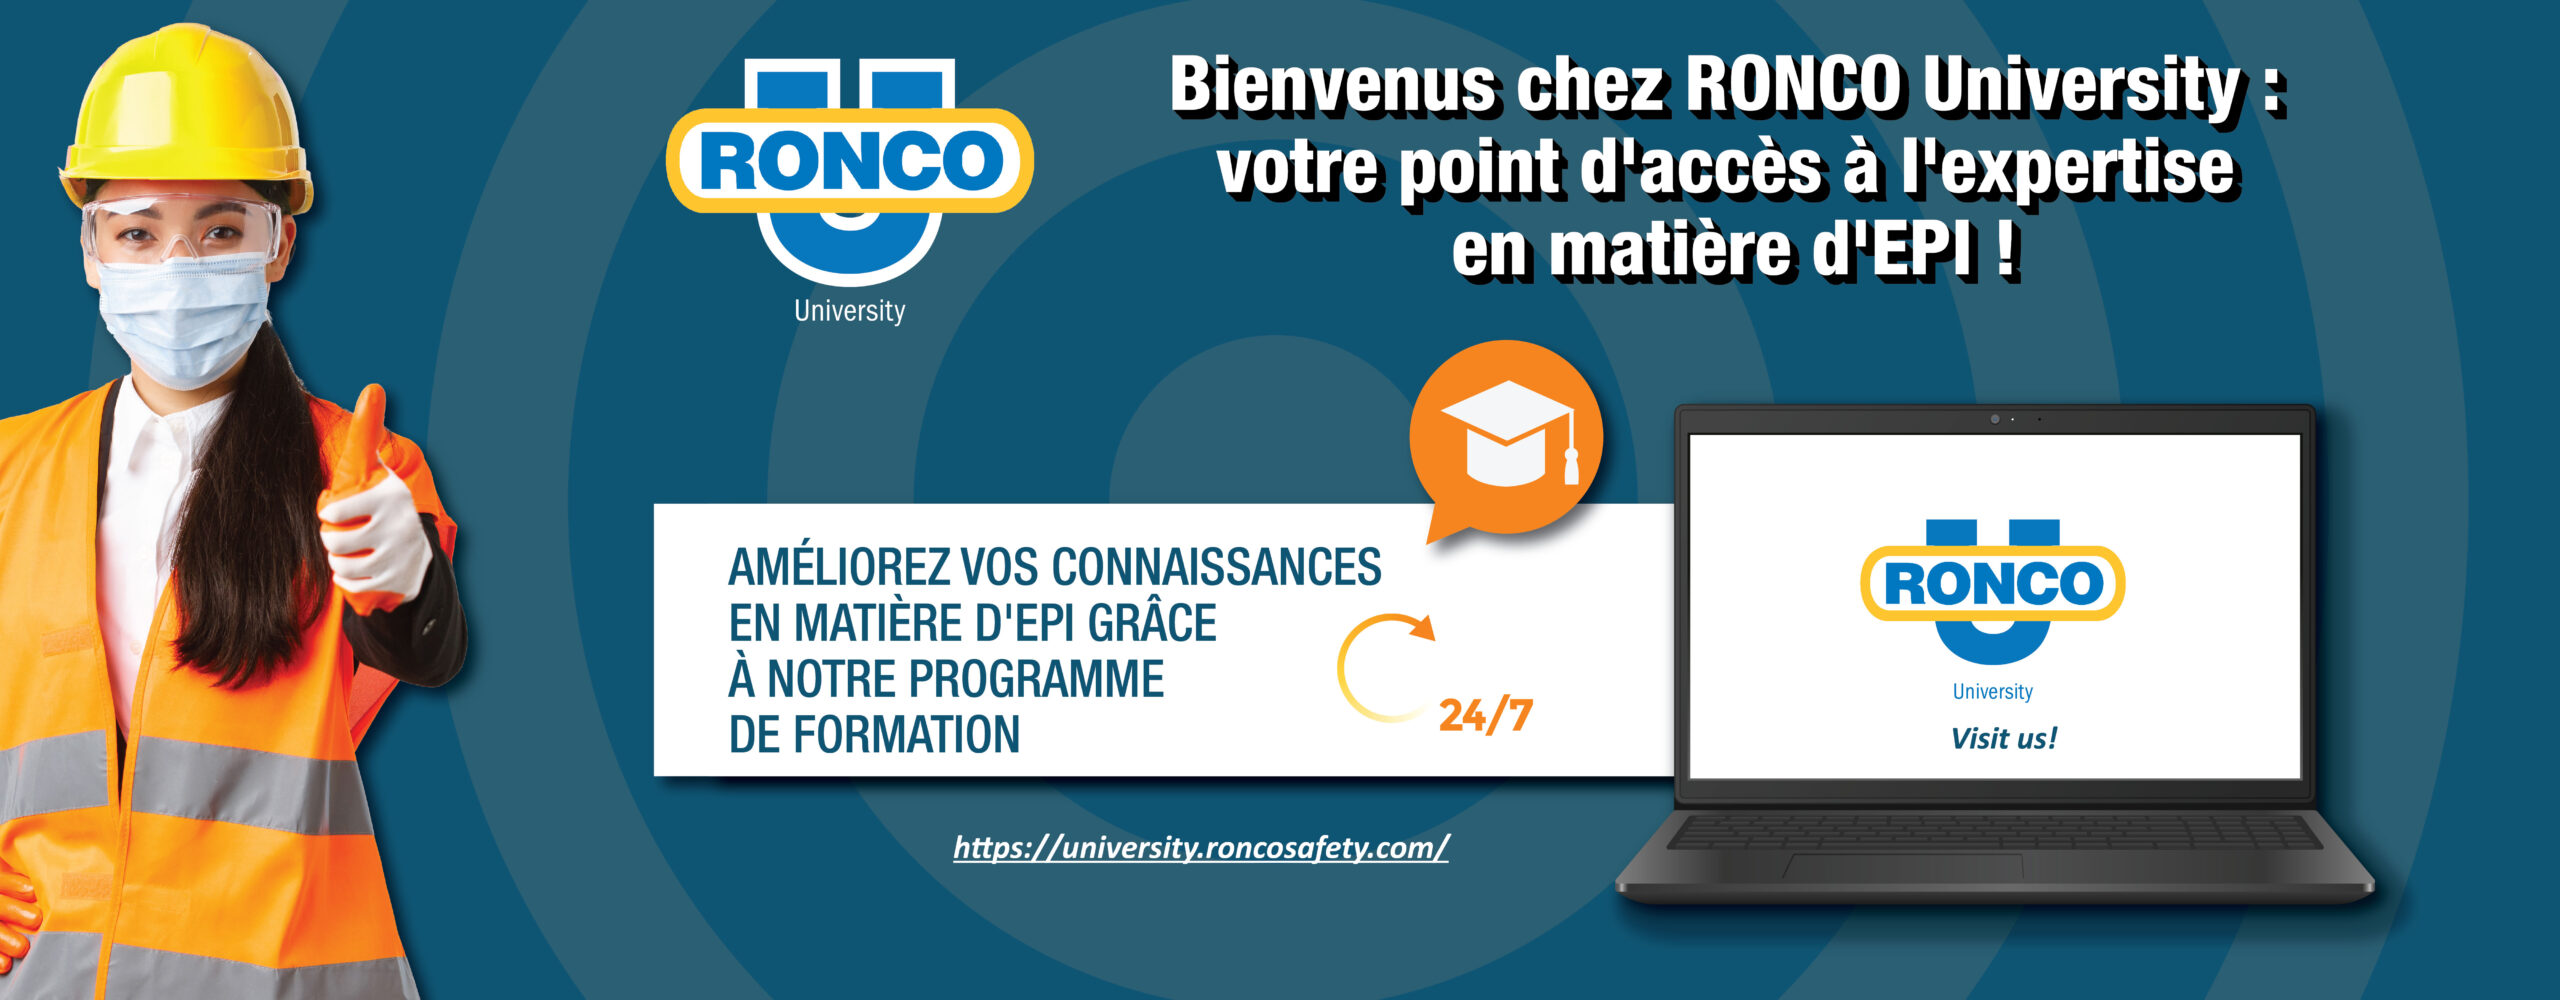 RONCO-Banner-image